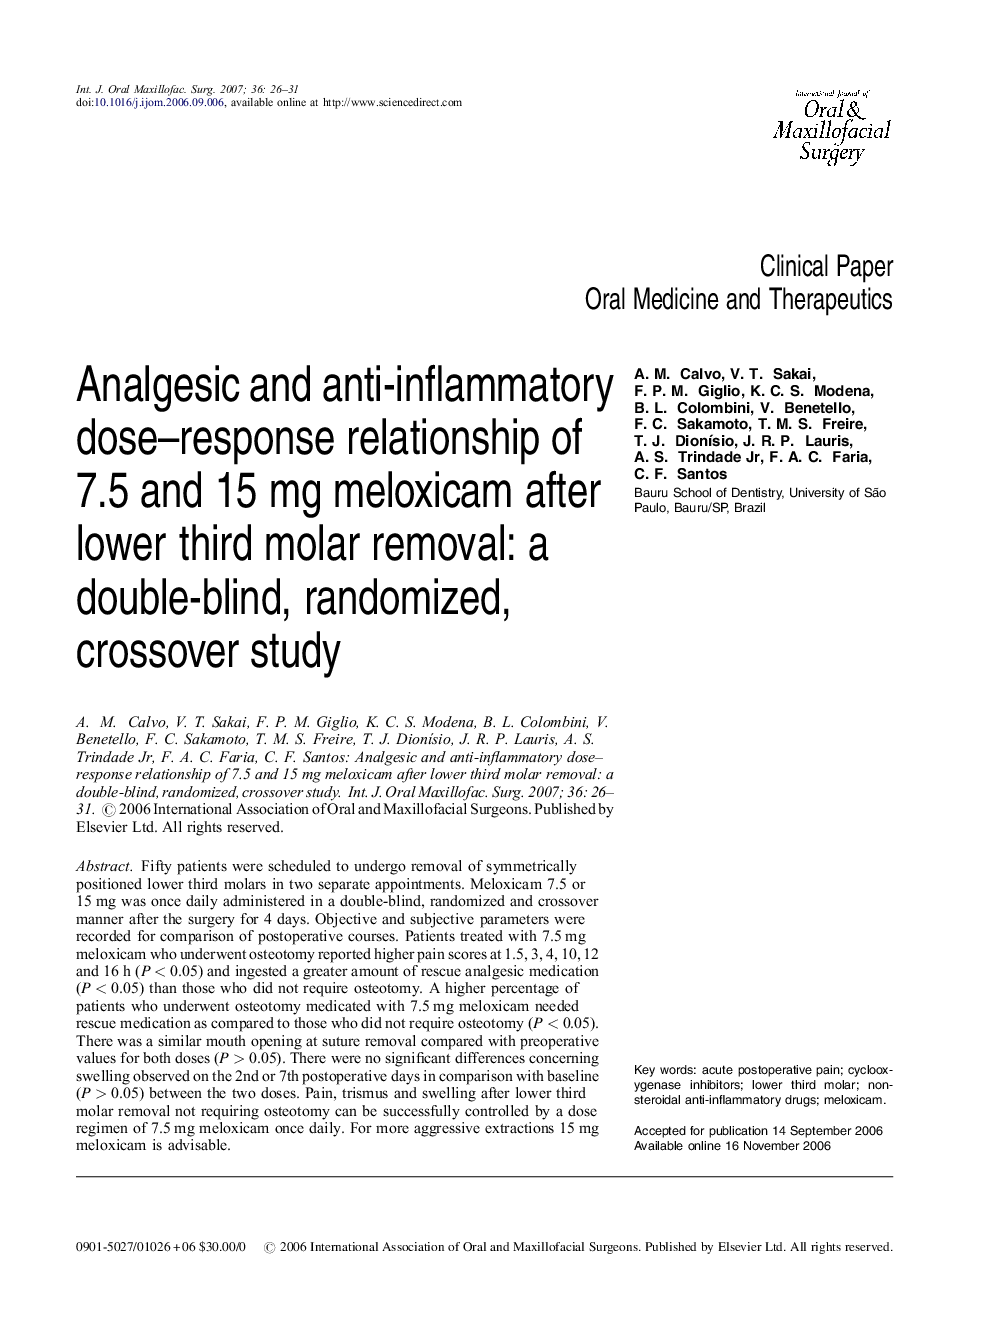 Analgesic and anti-inflammatory dose-response relationship of 7.5 and 15Â mg meloxicam after lower third molar removal: a double-blind, randomized, crossover study